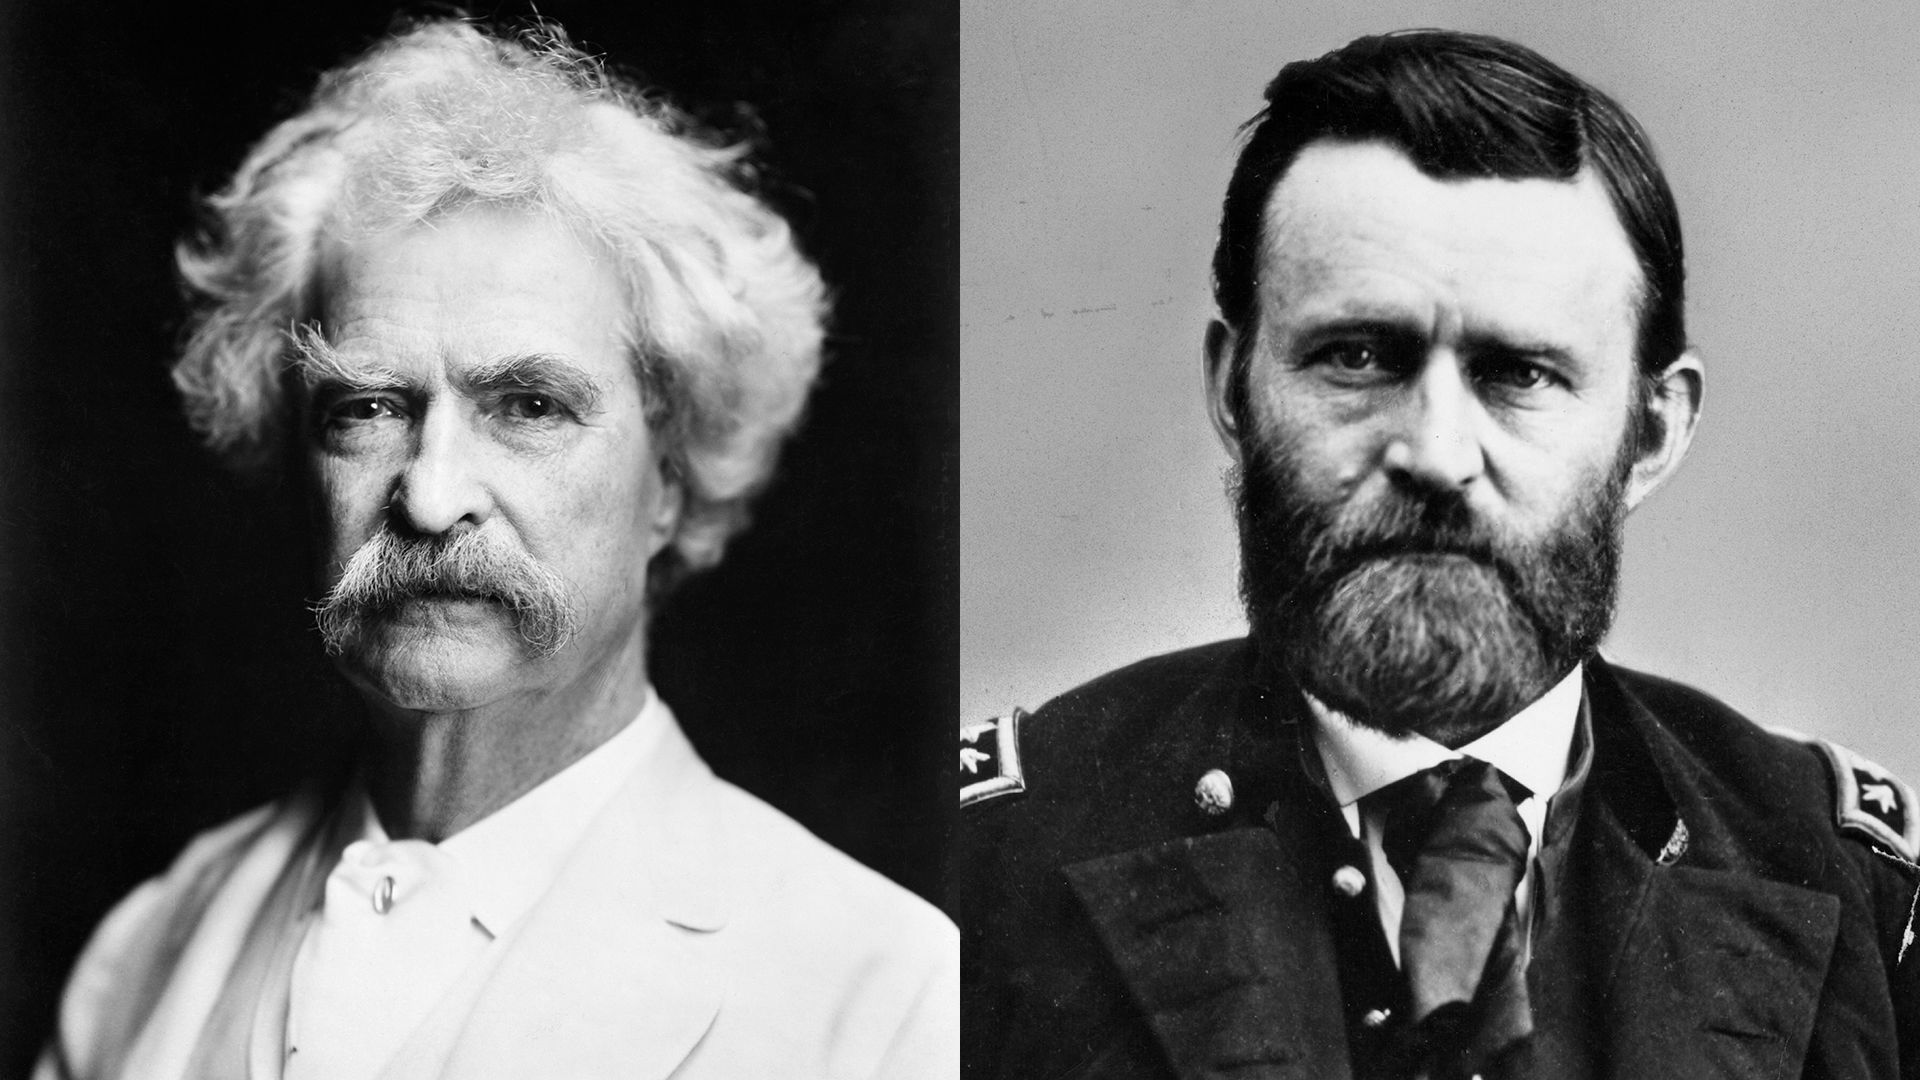 The Unlikely Friendship of Mark Twain and Ulysses S. Grant